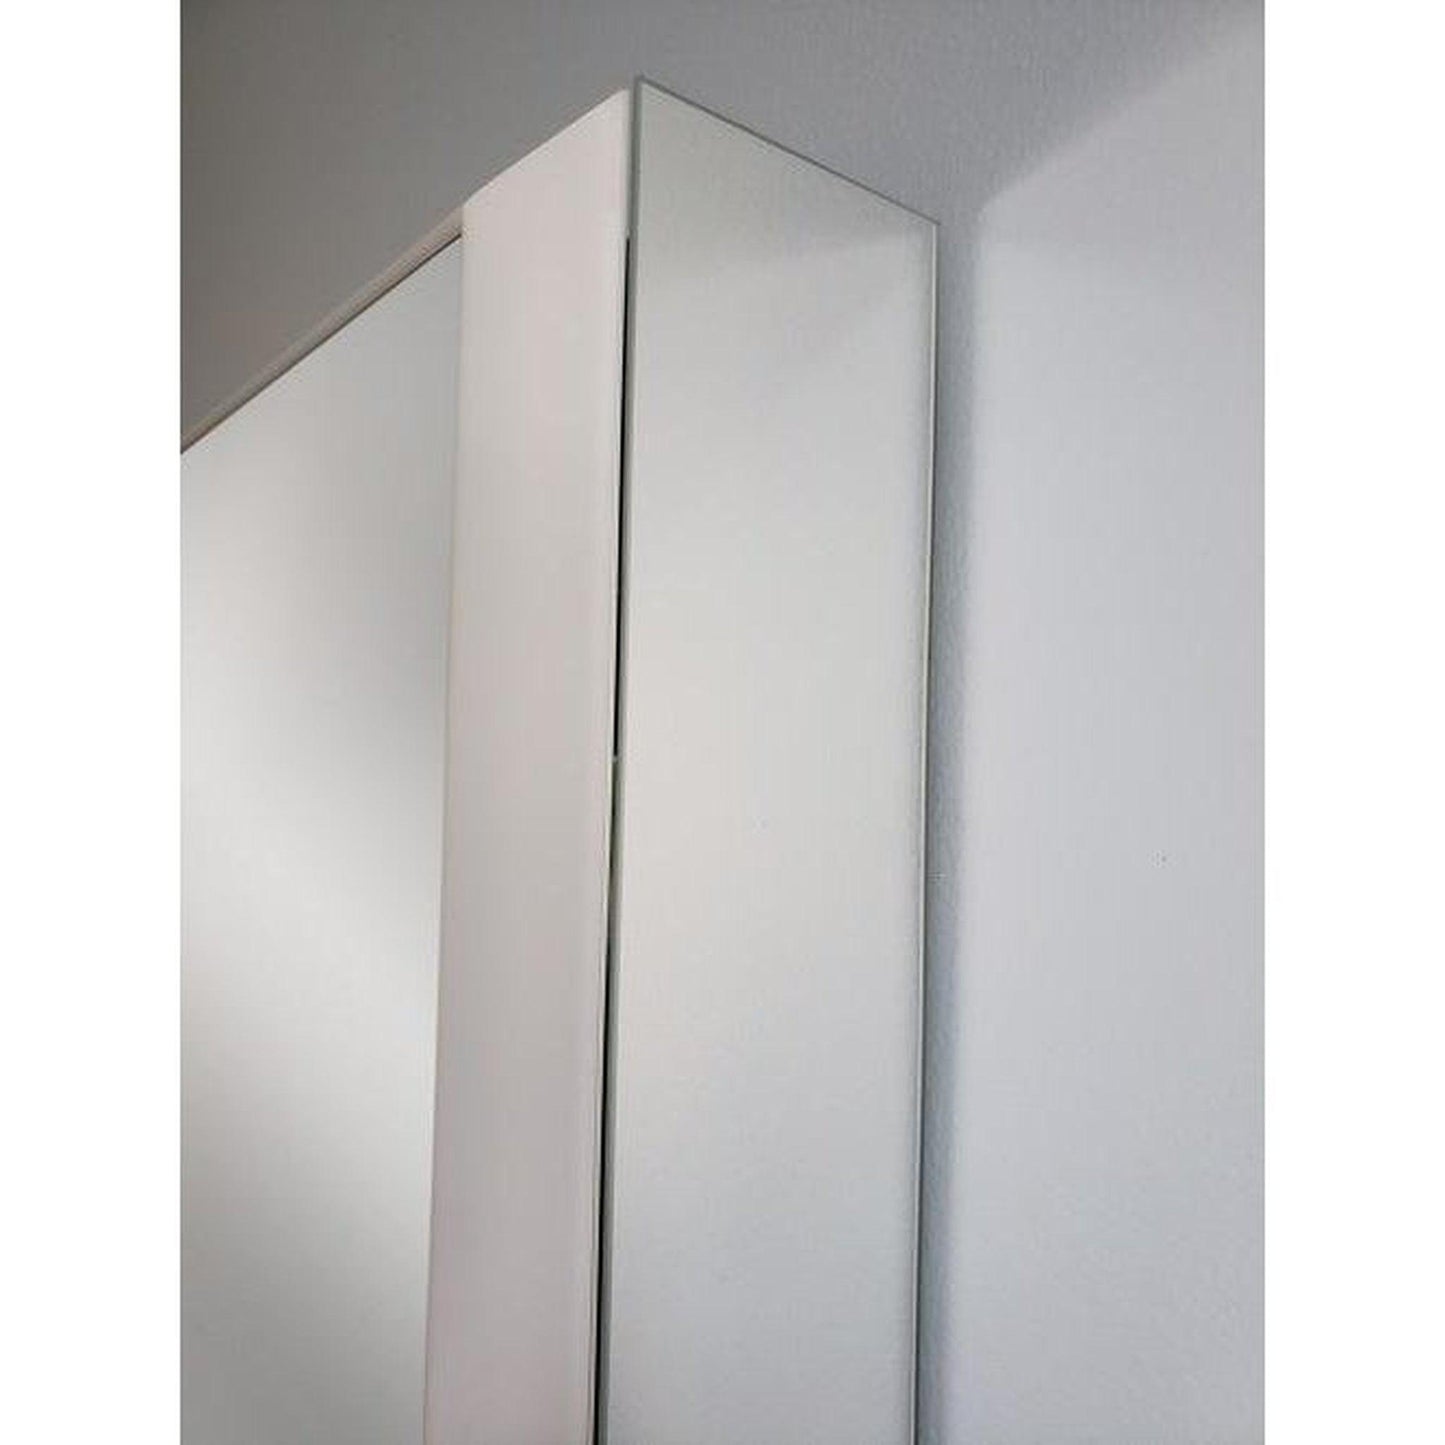 Sidler Quadro 20" x 36" 4000K Single Right Hinged Mirror Door Anodized Aluminum Medicine Cabinet With Night Light Function, Built-in GFCI Outlet and USB port